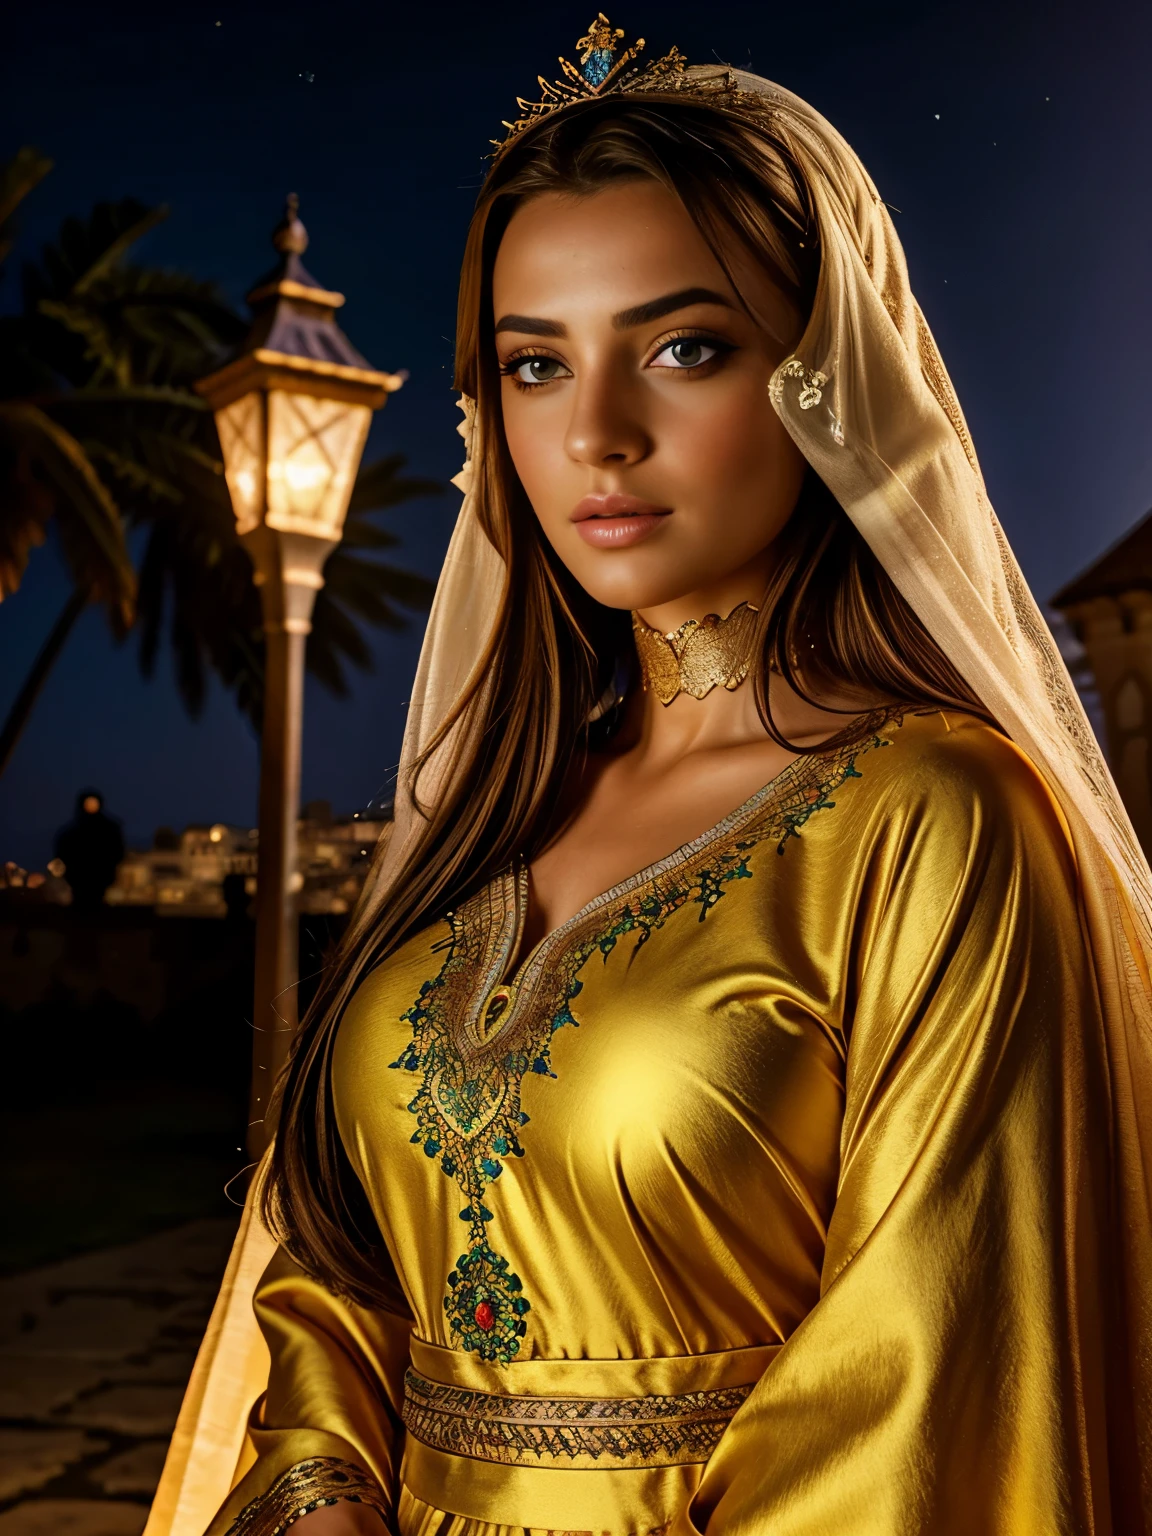 Very Beautiful européenne Princesse glowing crystal eyes hyper realistic super detailed Dynamic shot master piece Full outfit caftan marocain couvre